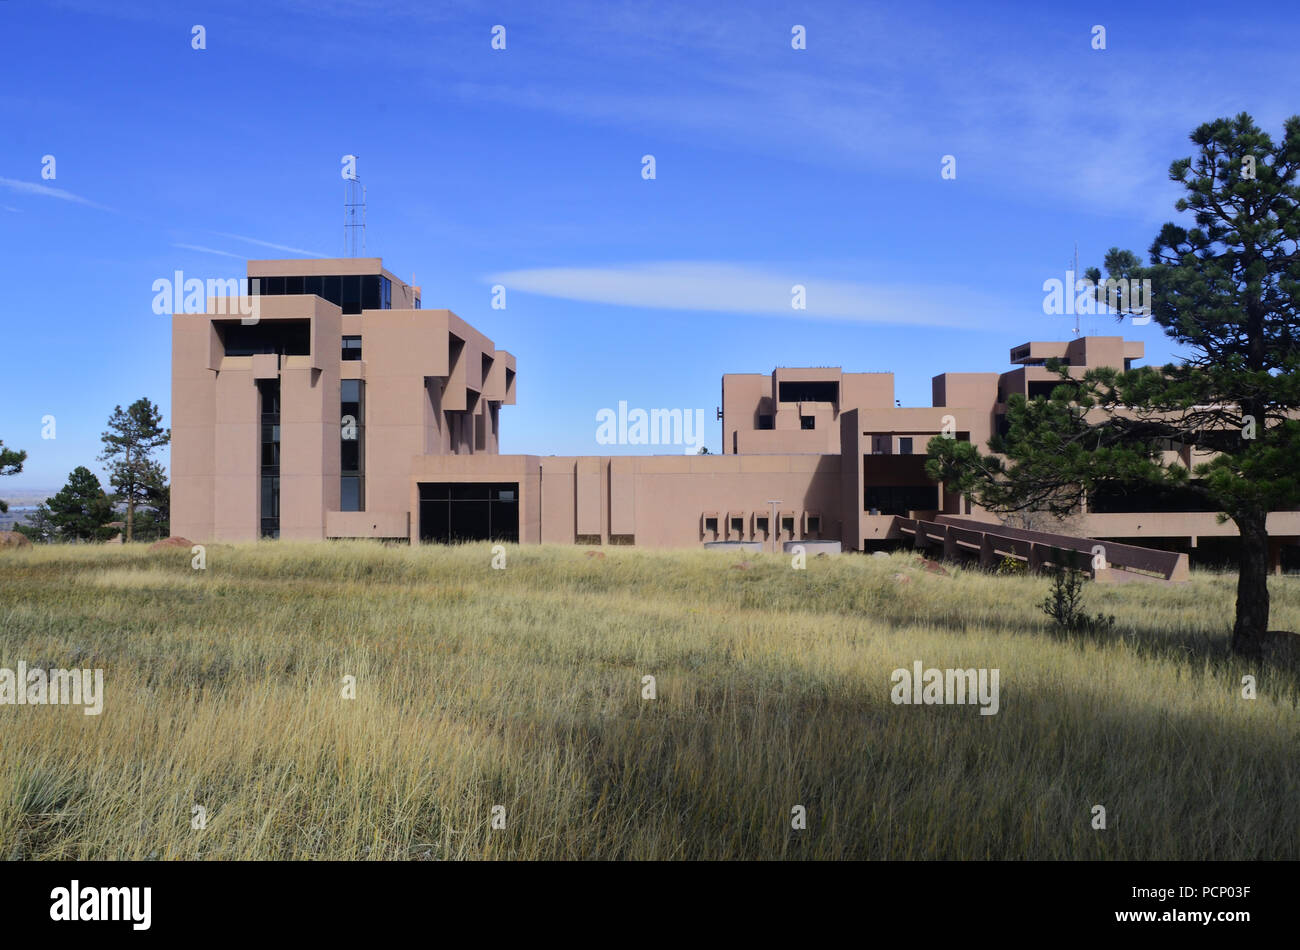 his building was designed by modernist architect I.M. Pei in 1961. Anasazi cliff dwellings inspired the architecture. The award-winning building was c Stock Photo